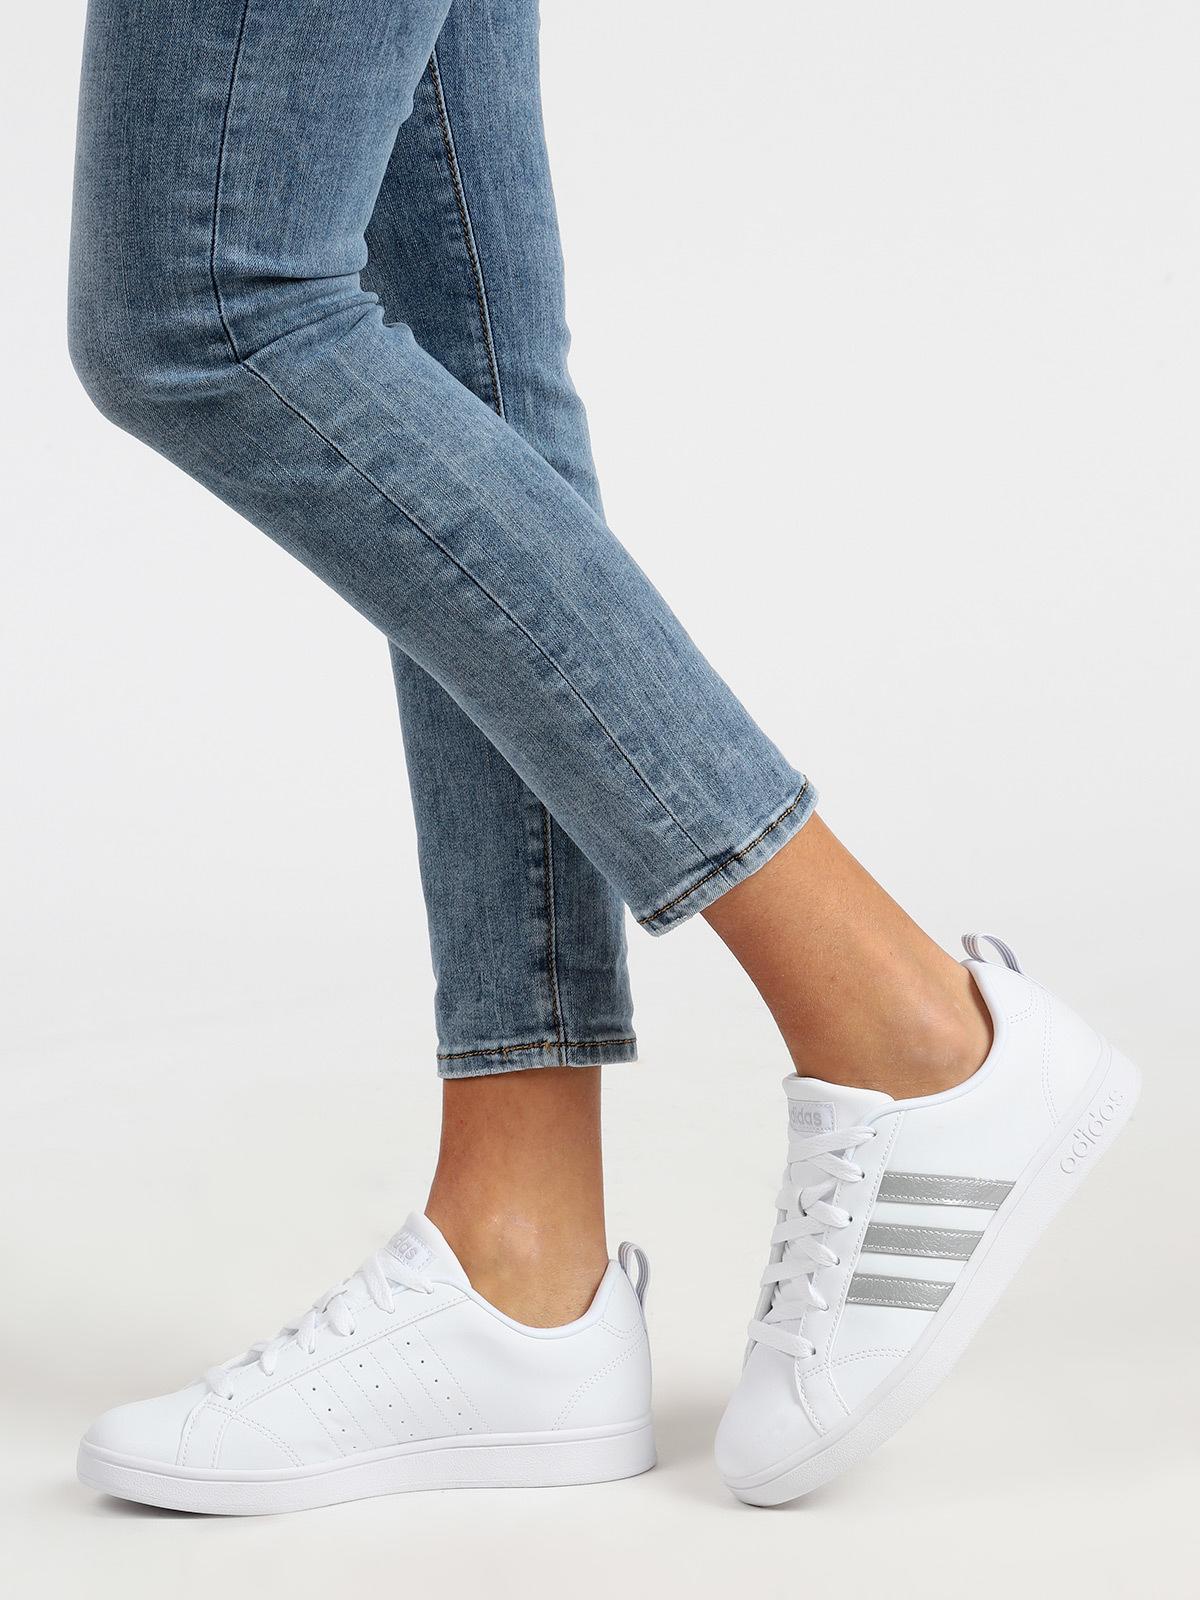 adidas donna sneakers bianche